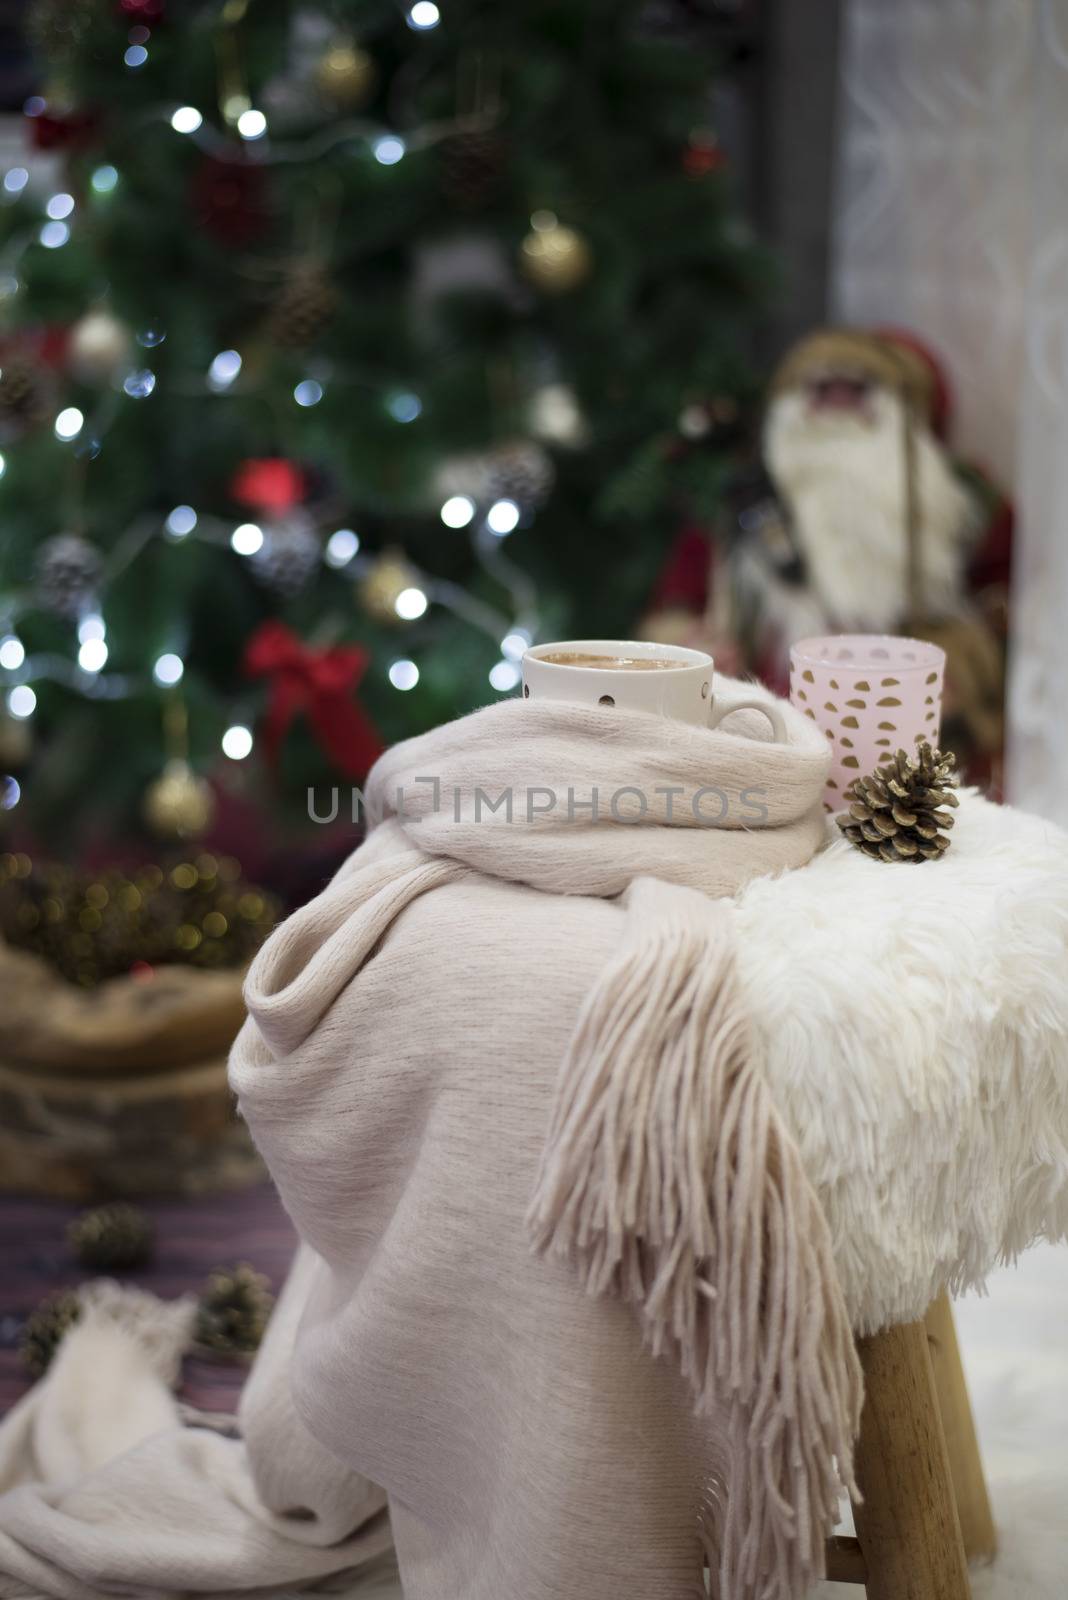 Christmas time. Hot chocolate, a cup of cappuccino on a fur chair in front of a large Christmas tree with balls and lights. Warm scarf, cones around